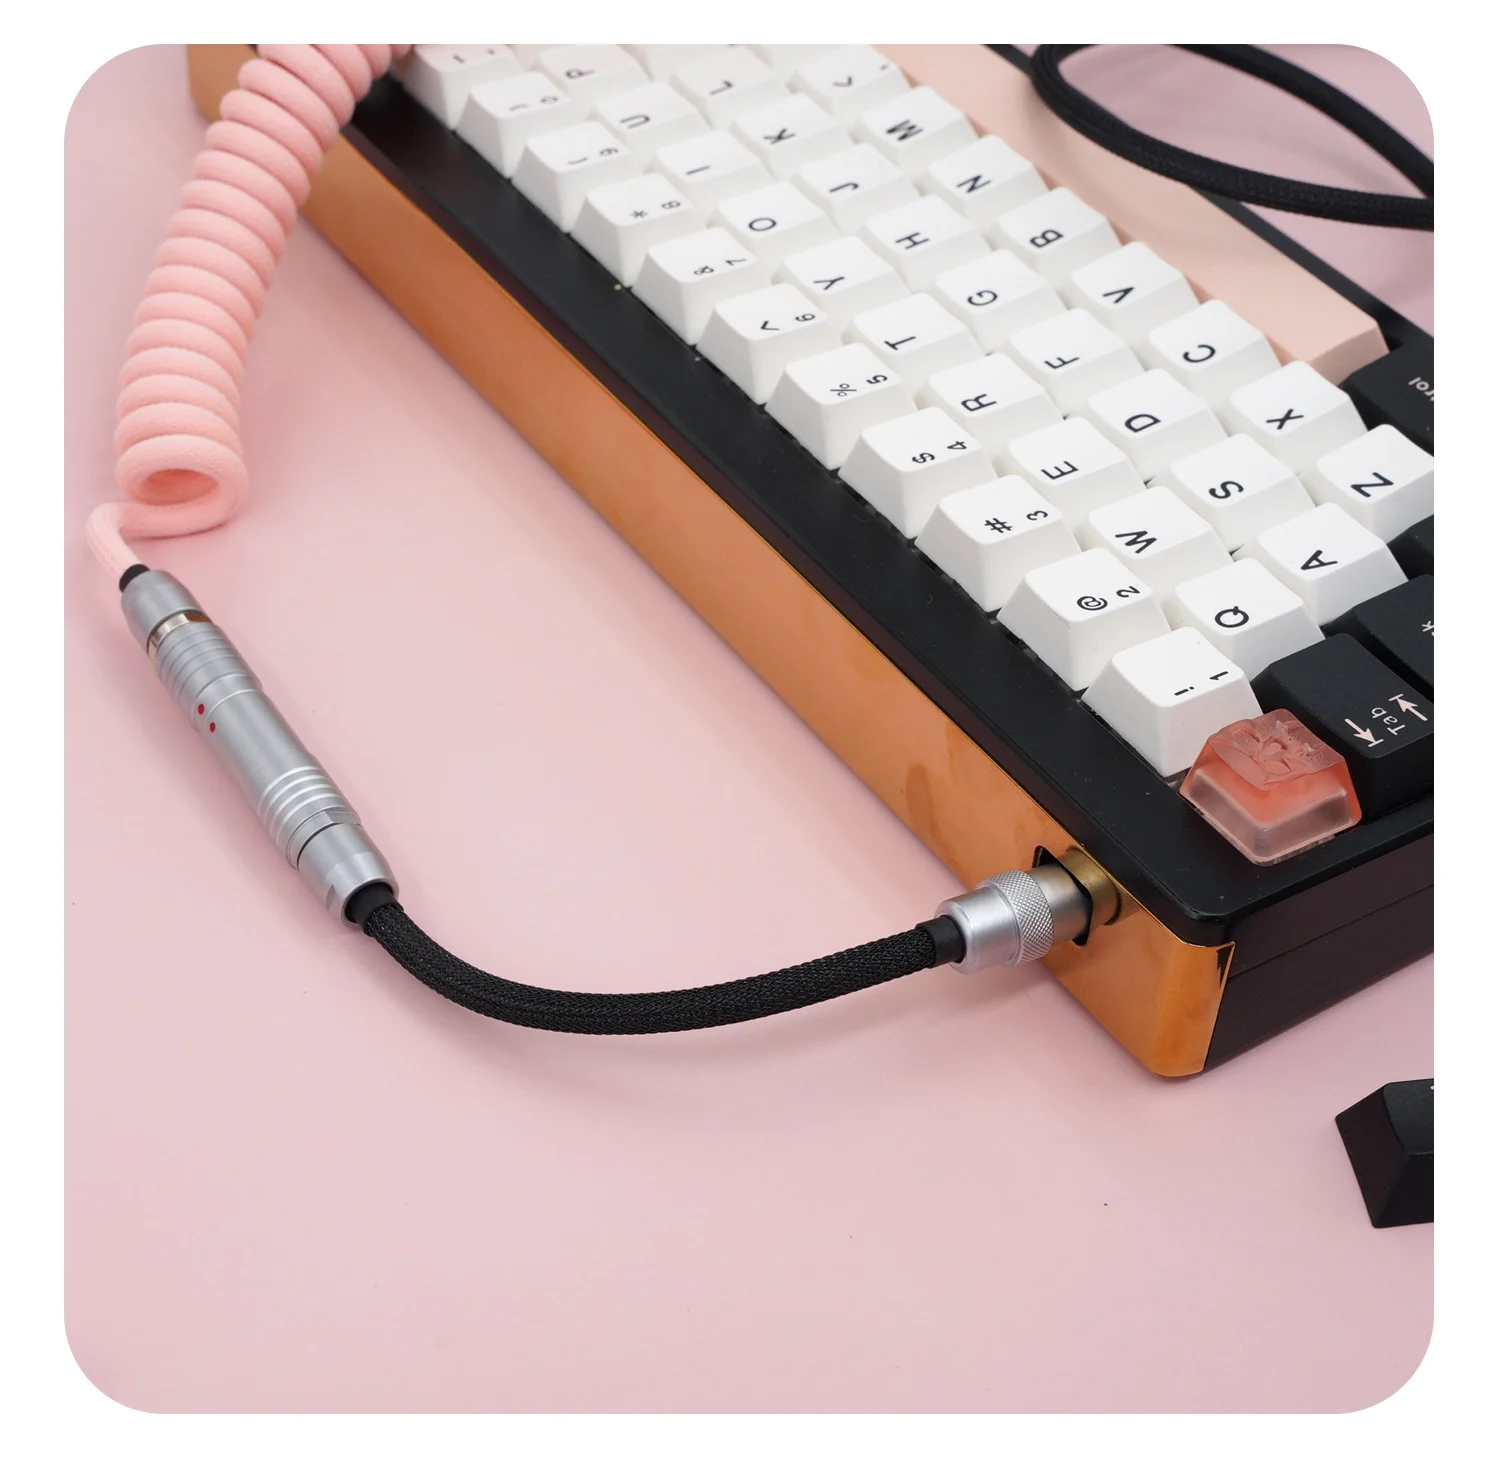 GeekCable Handmade Customized Mechanical Keyboard Data Cable For GMK Theme SP Keycap Line Olivia Pink And Black Colorway images - 6